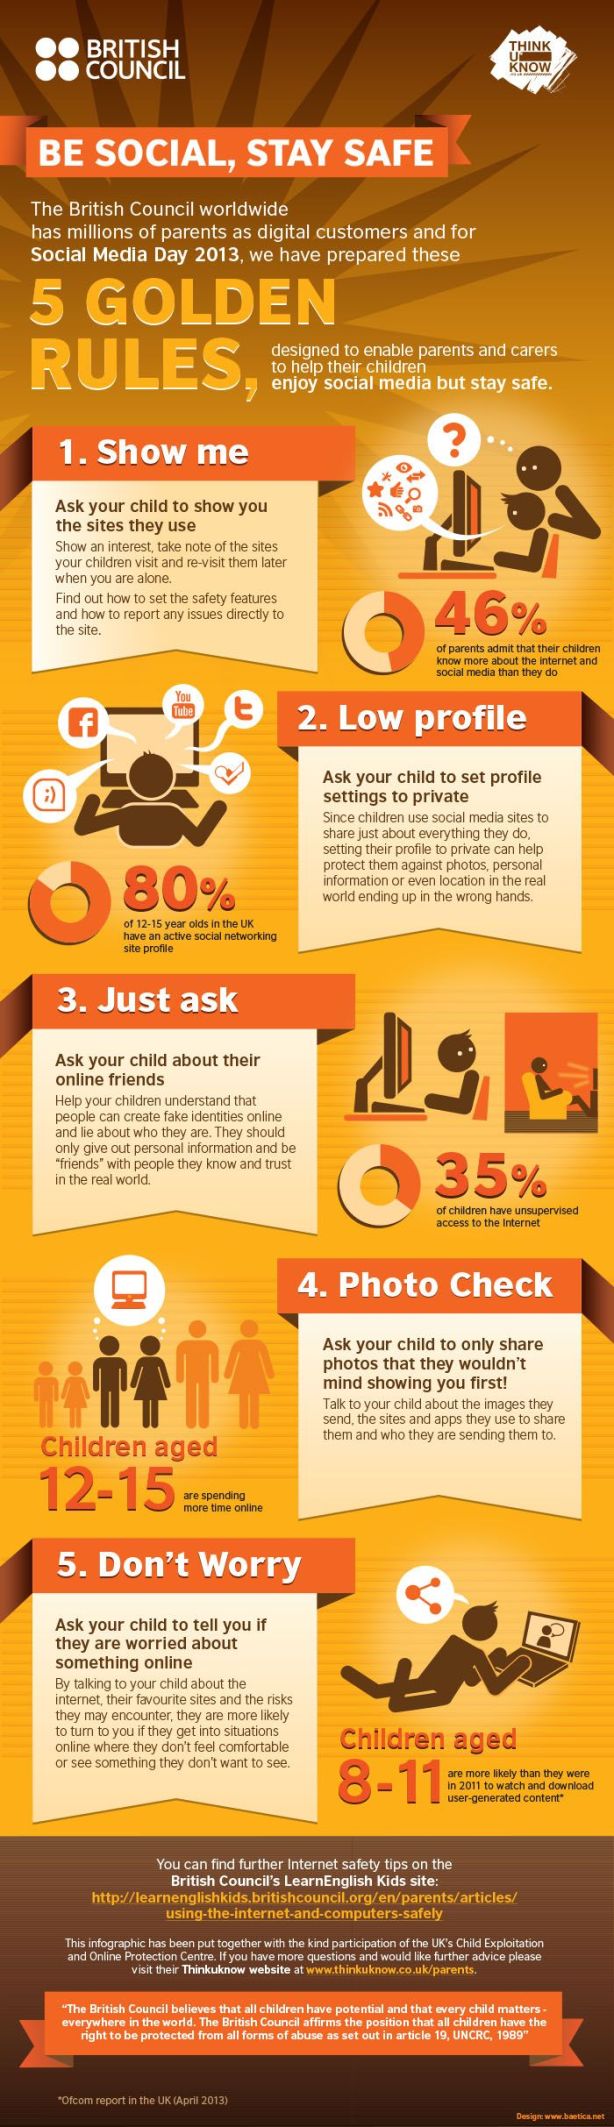 5 golden Rules for Parents